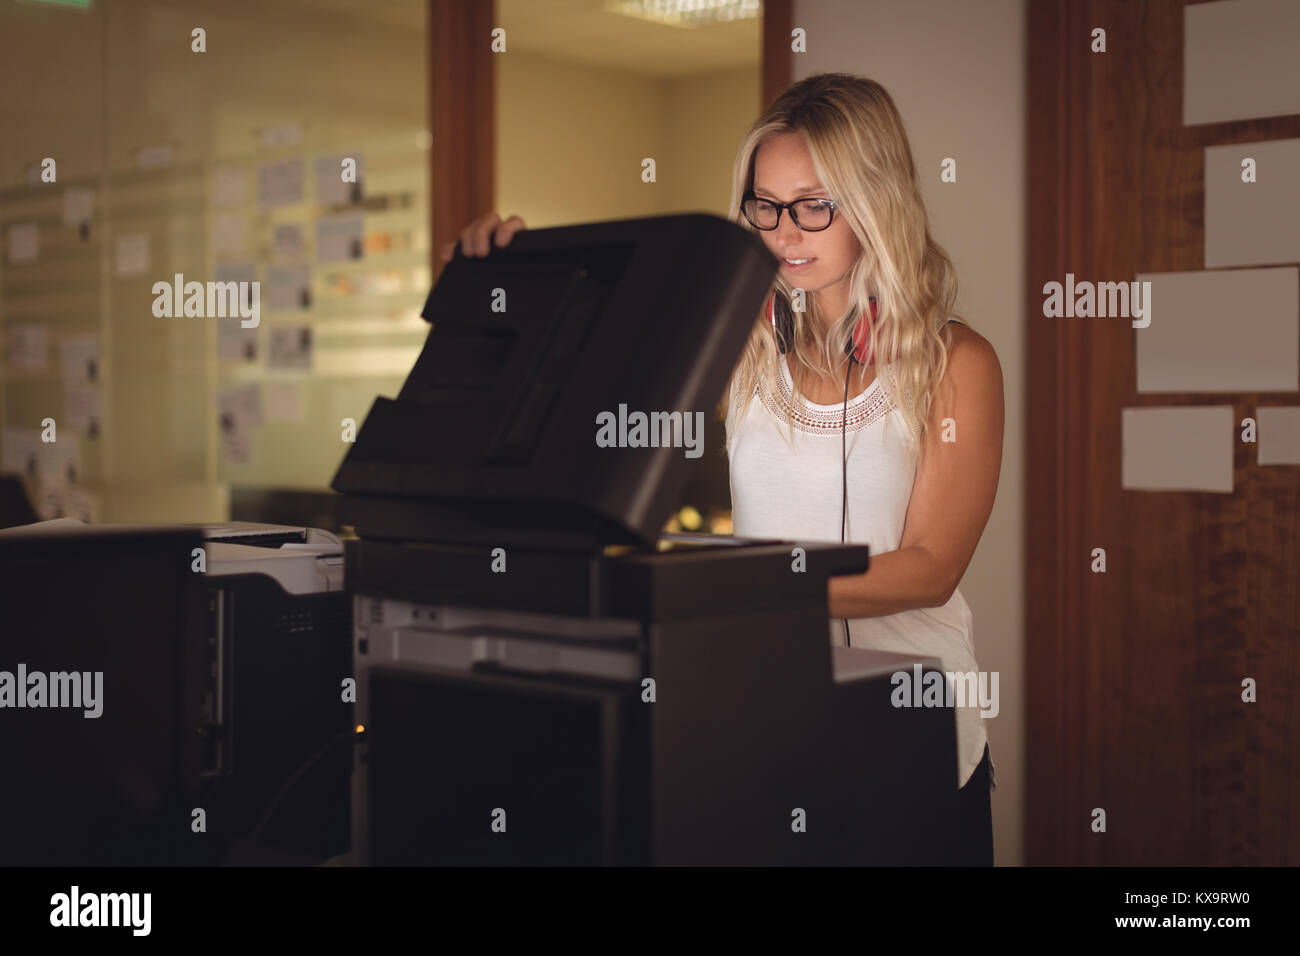 Executive using photocopy machine in office Stock Photo